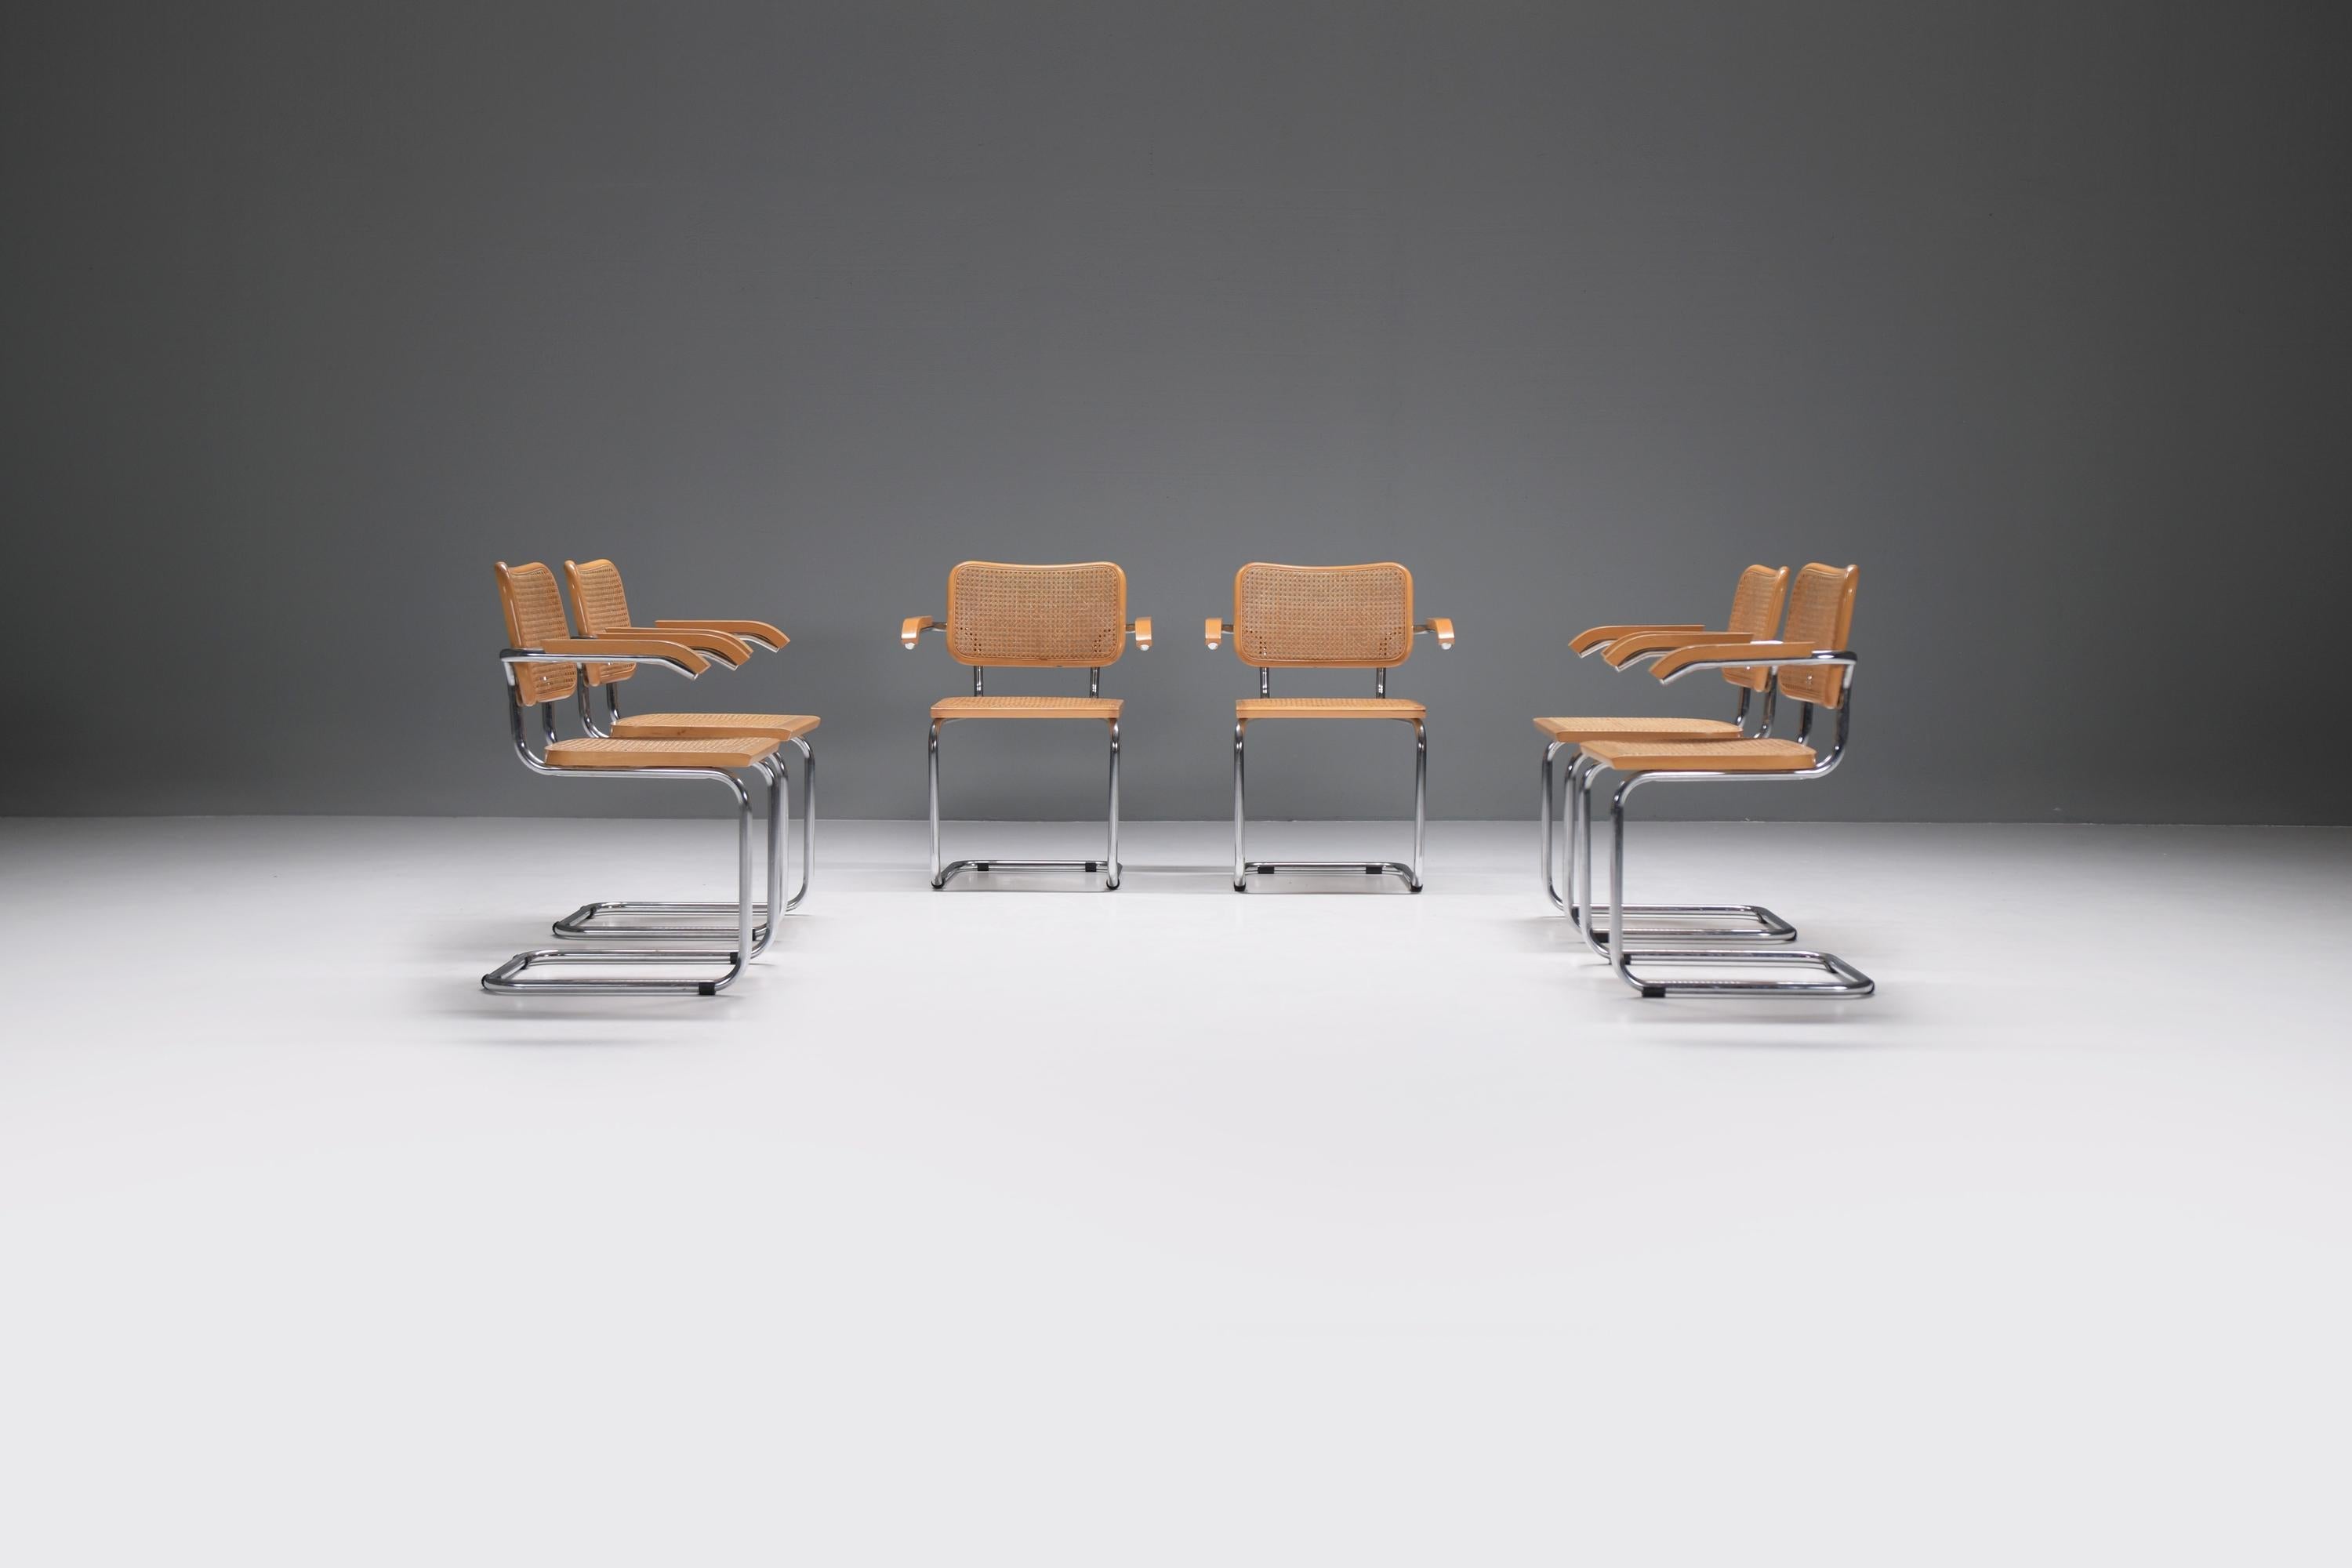 Nice set of armchairs with a a chromed-steel tubular cantilever base and a caned seat and back encased in a frame of beech.
Inspired on the famous Cesca chairs from Marcel Breuer.

Marcel Breuer conceived the first tubular steel chair, in 1925,